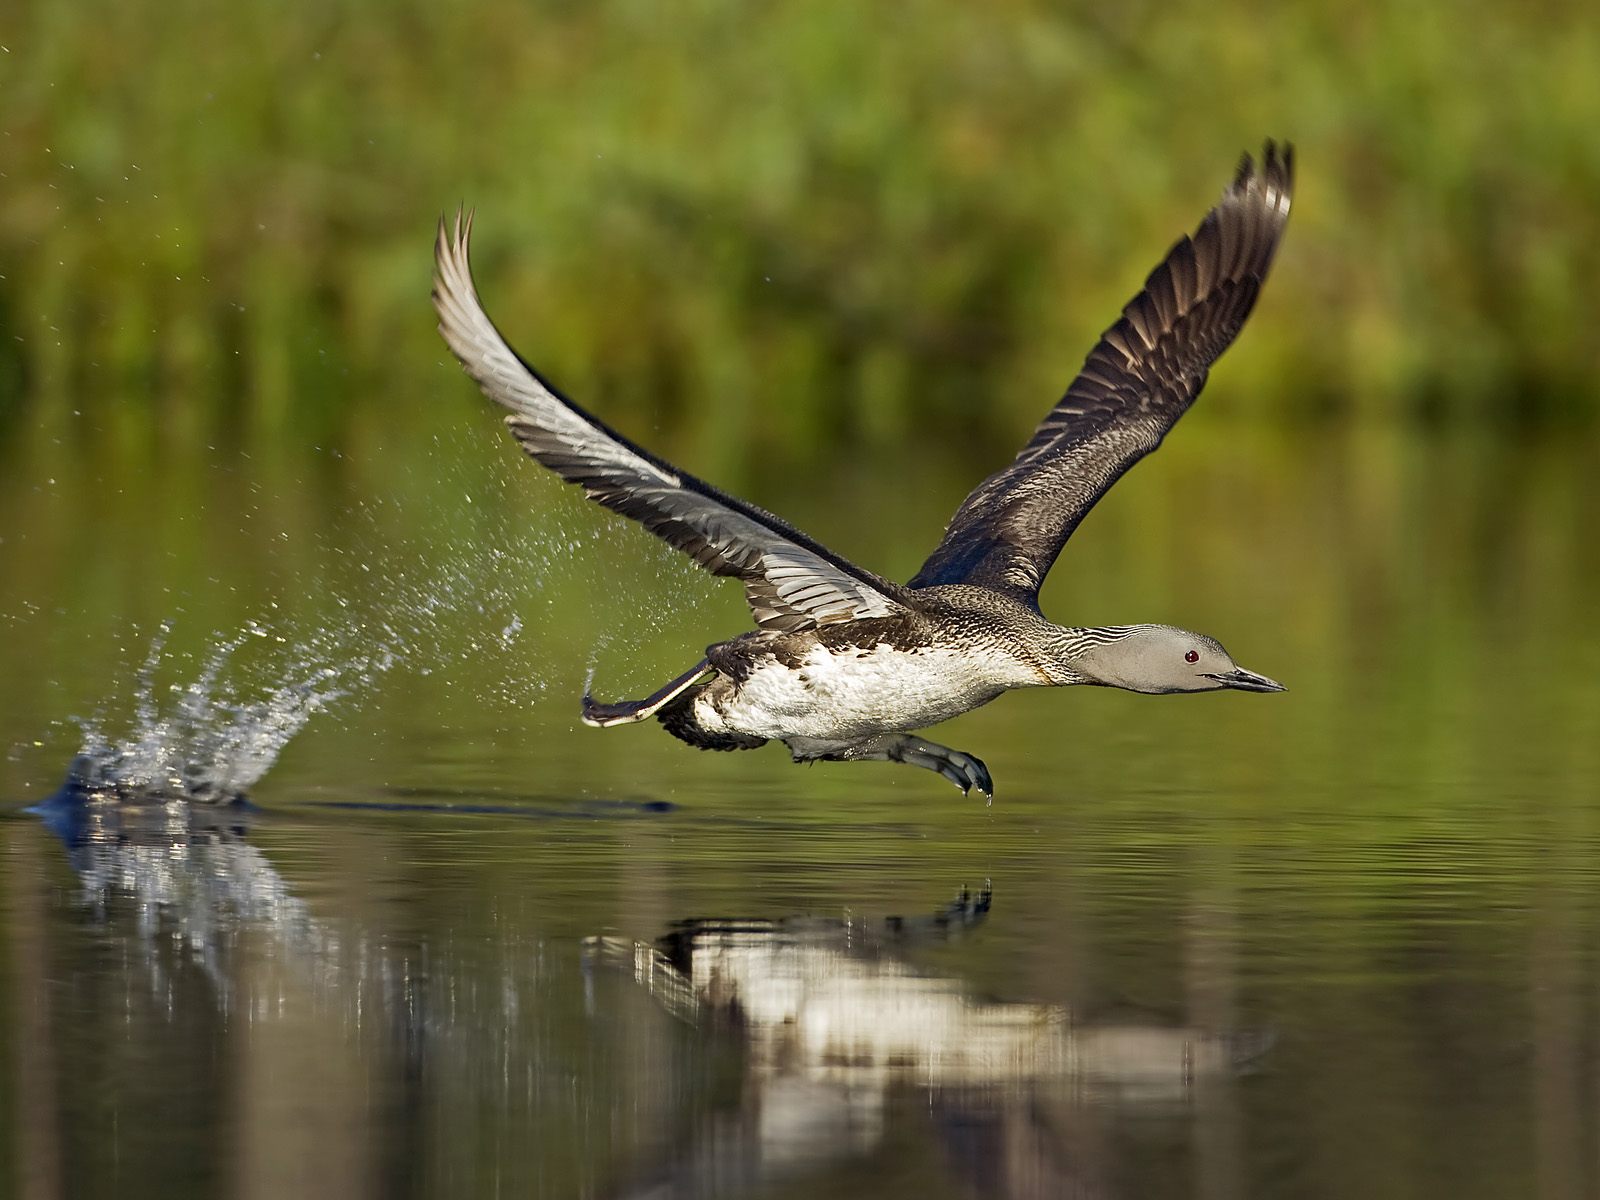 A bird running on water поиск wallpapers and images - wallpapers ...